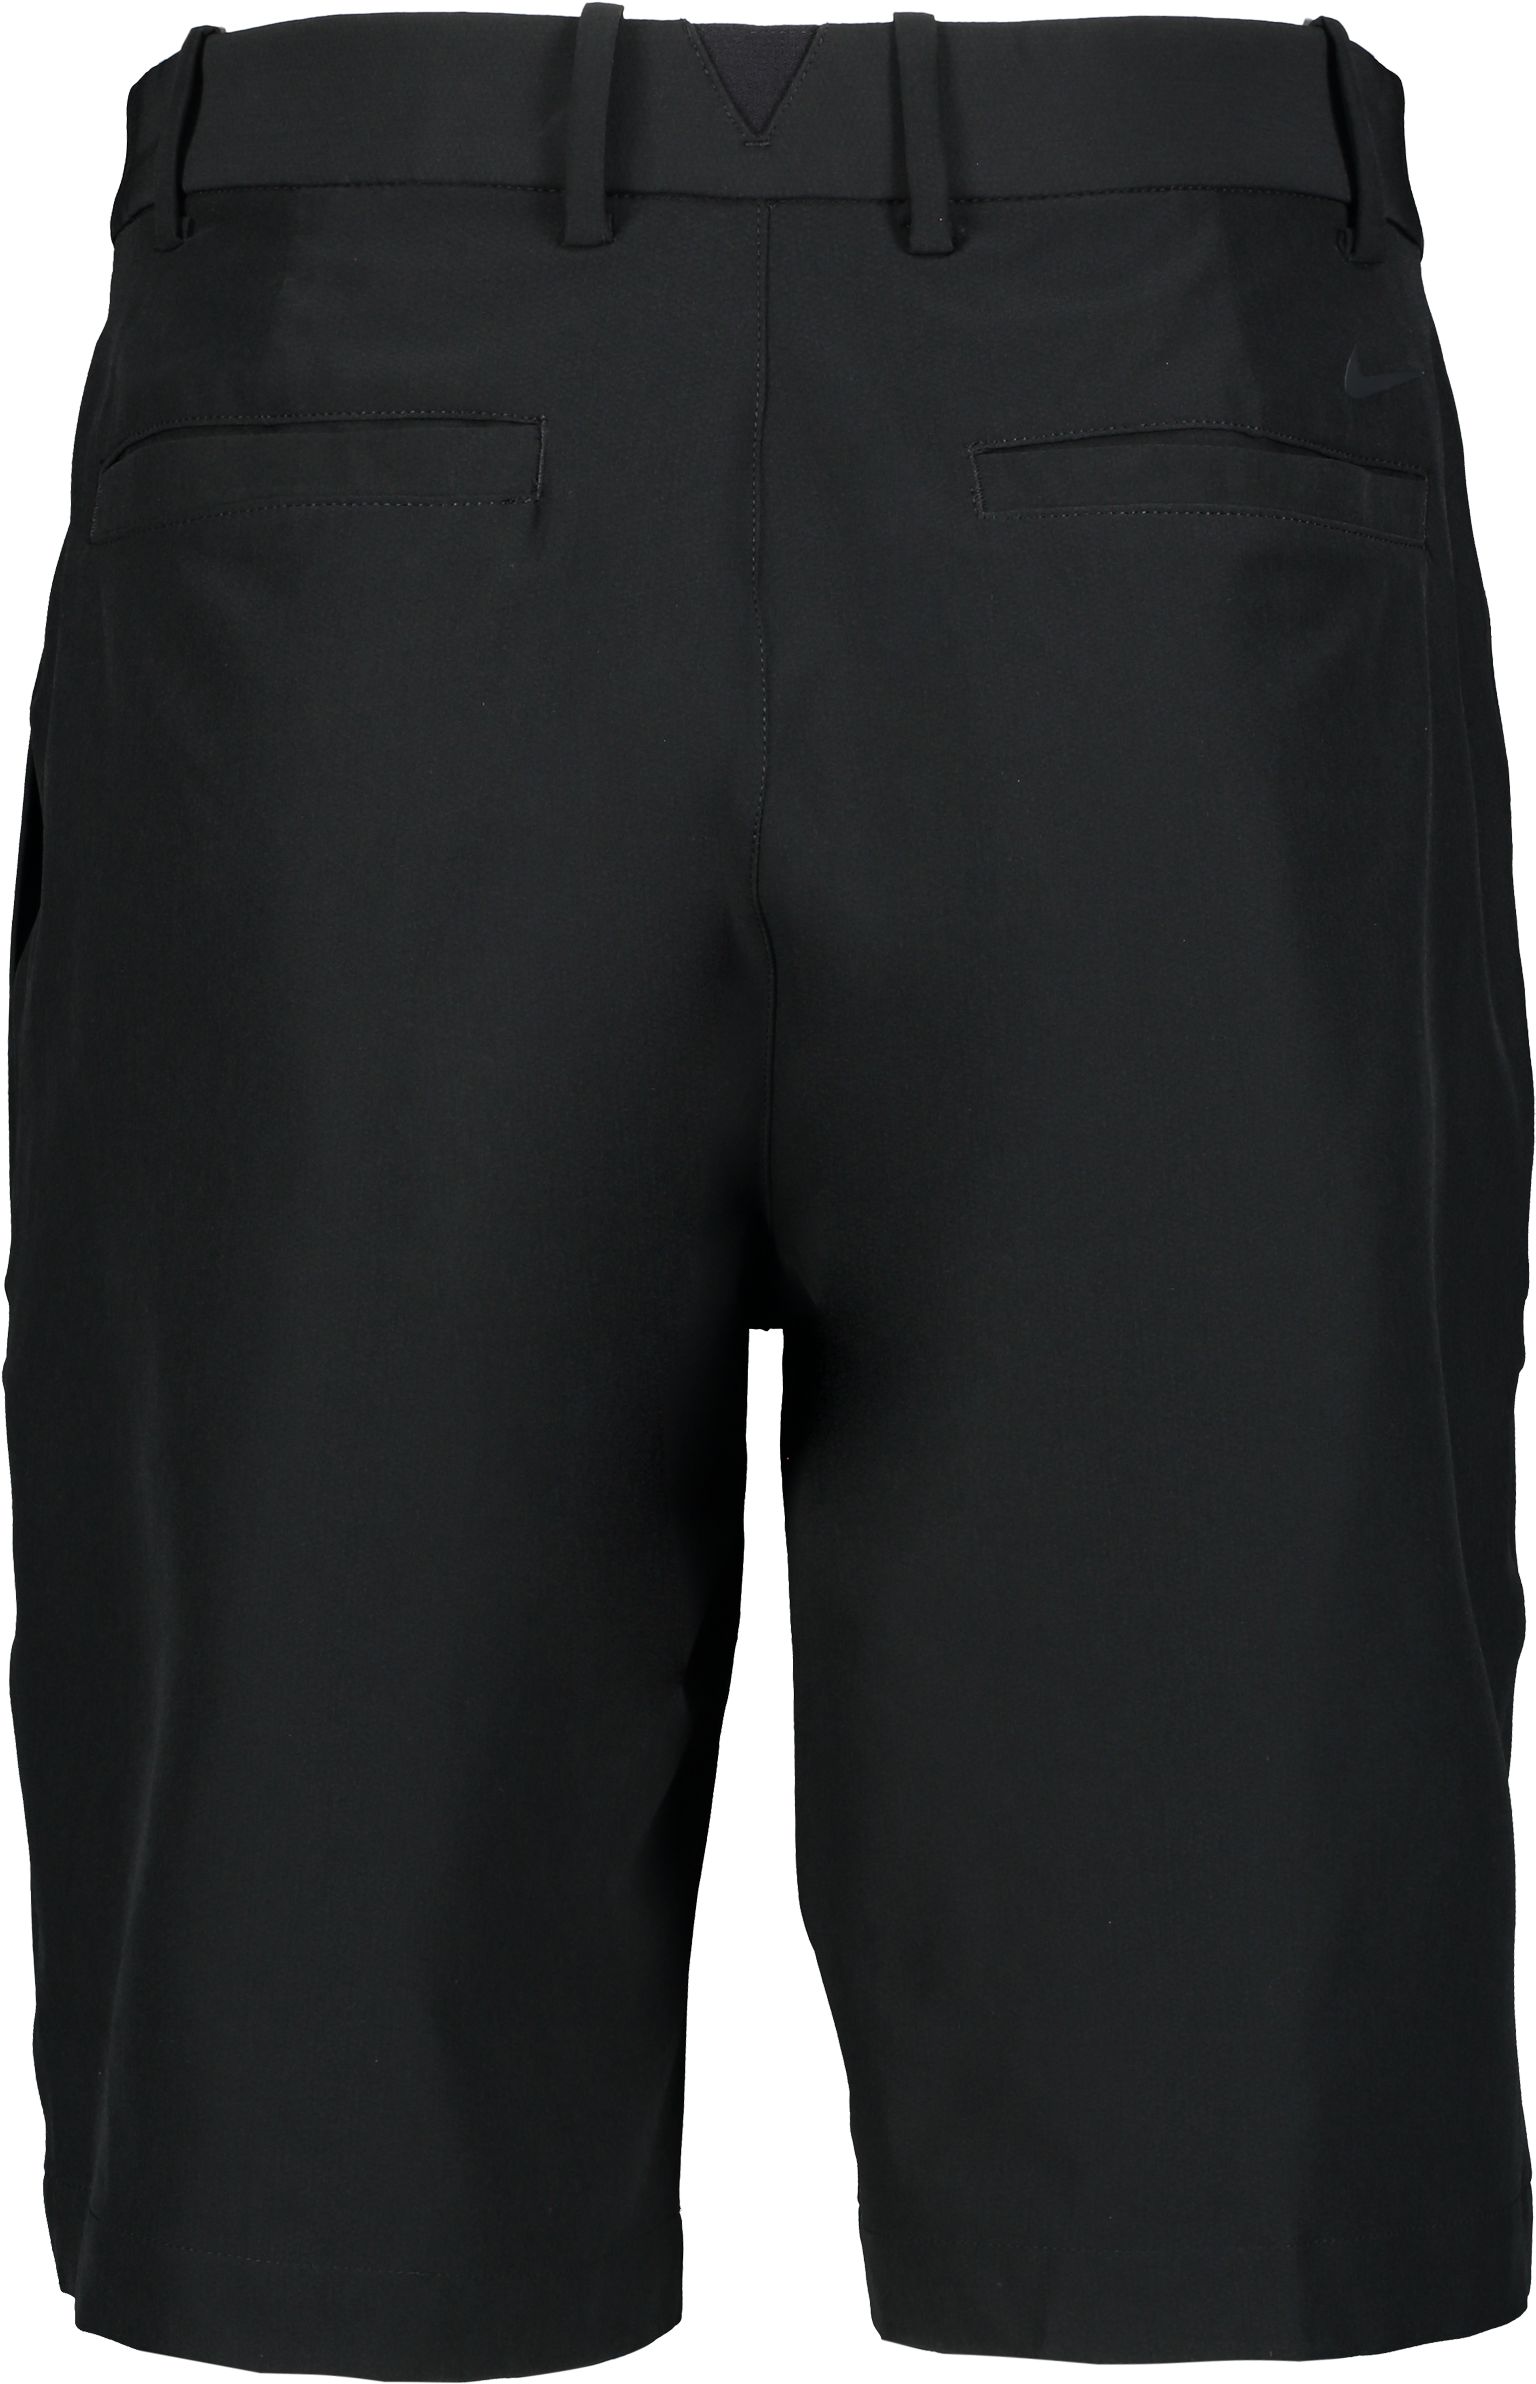 NIKE, M NK DRI-FIT VICTORY 10.5 IN SHORTS